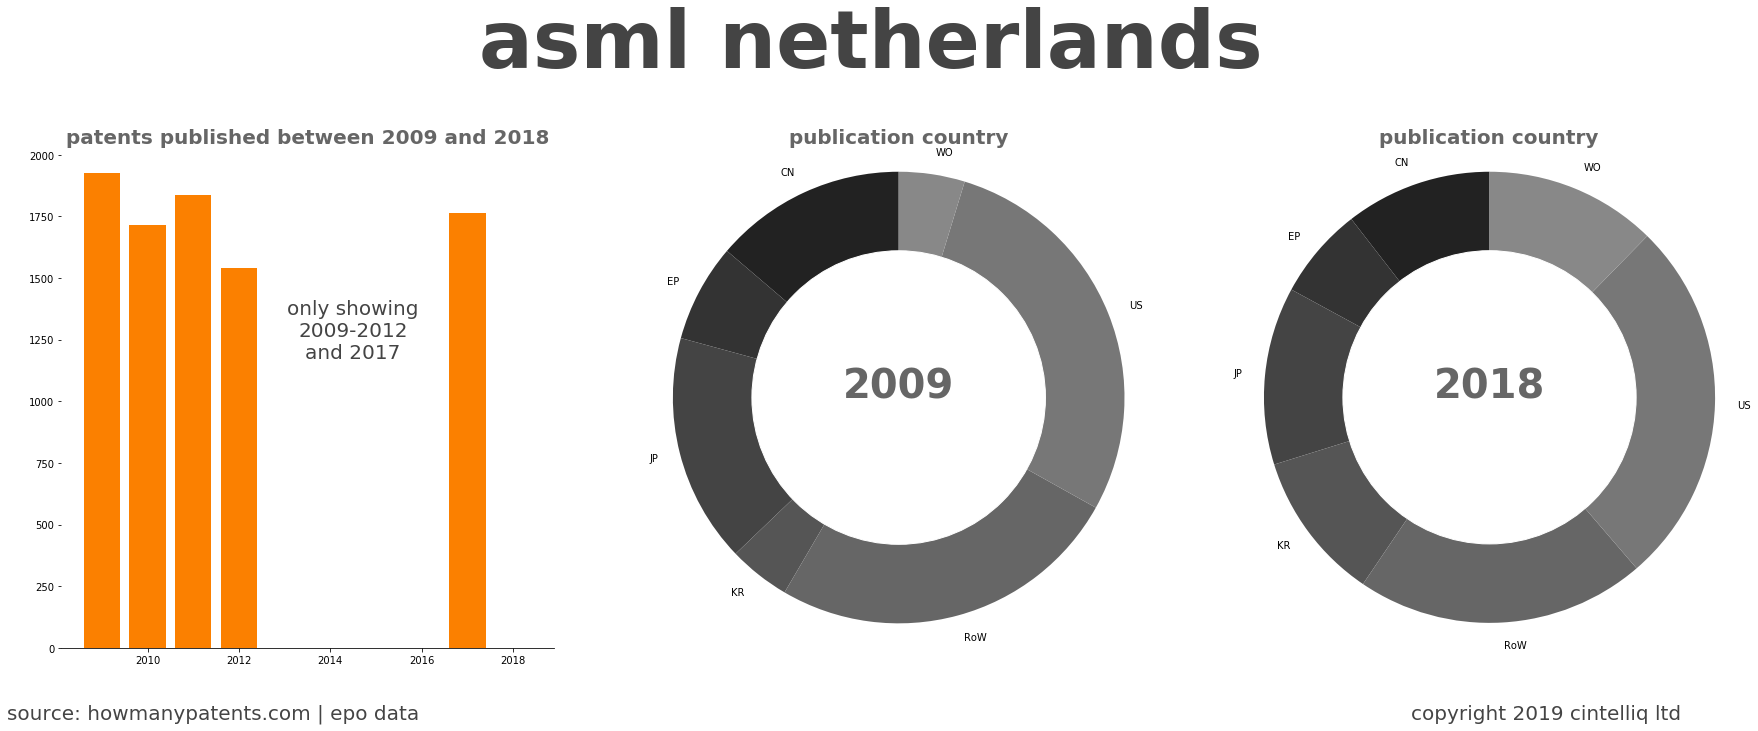 summary of patents for Asml Netherlands